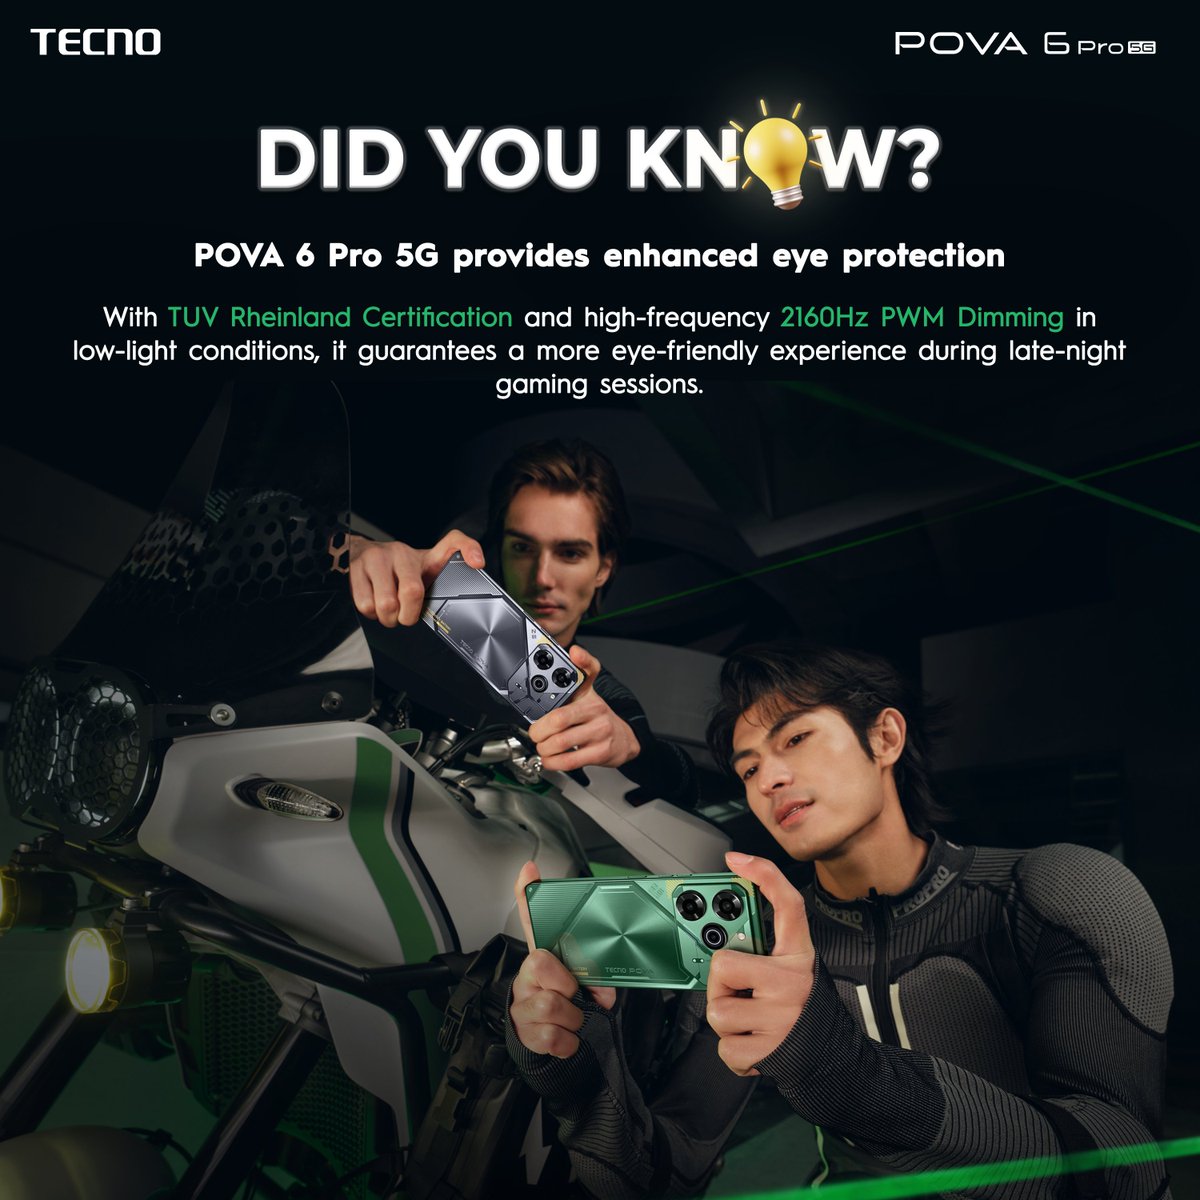 Enjoy a more eye-friendly gaming experience with the TECNO #POVA6Pro5G, which features TUV Rheinland Certification and high-frequency 2160Hz PWM Dimming in low-light conditions.  #TECNOPOVA6Pro5G #TECNOPOVA6Series #LimitlessPerformance #TECNOPhilippines